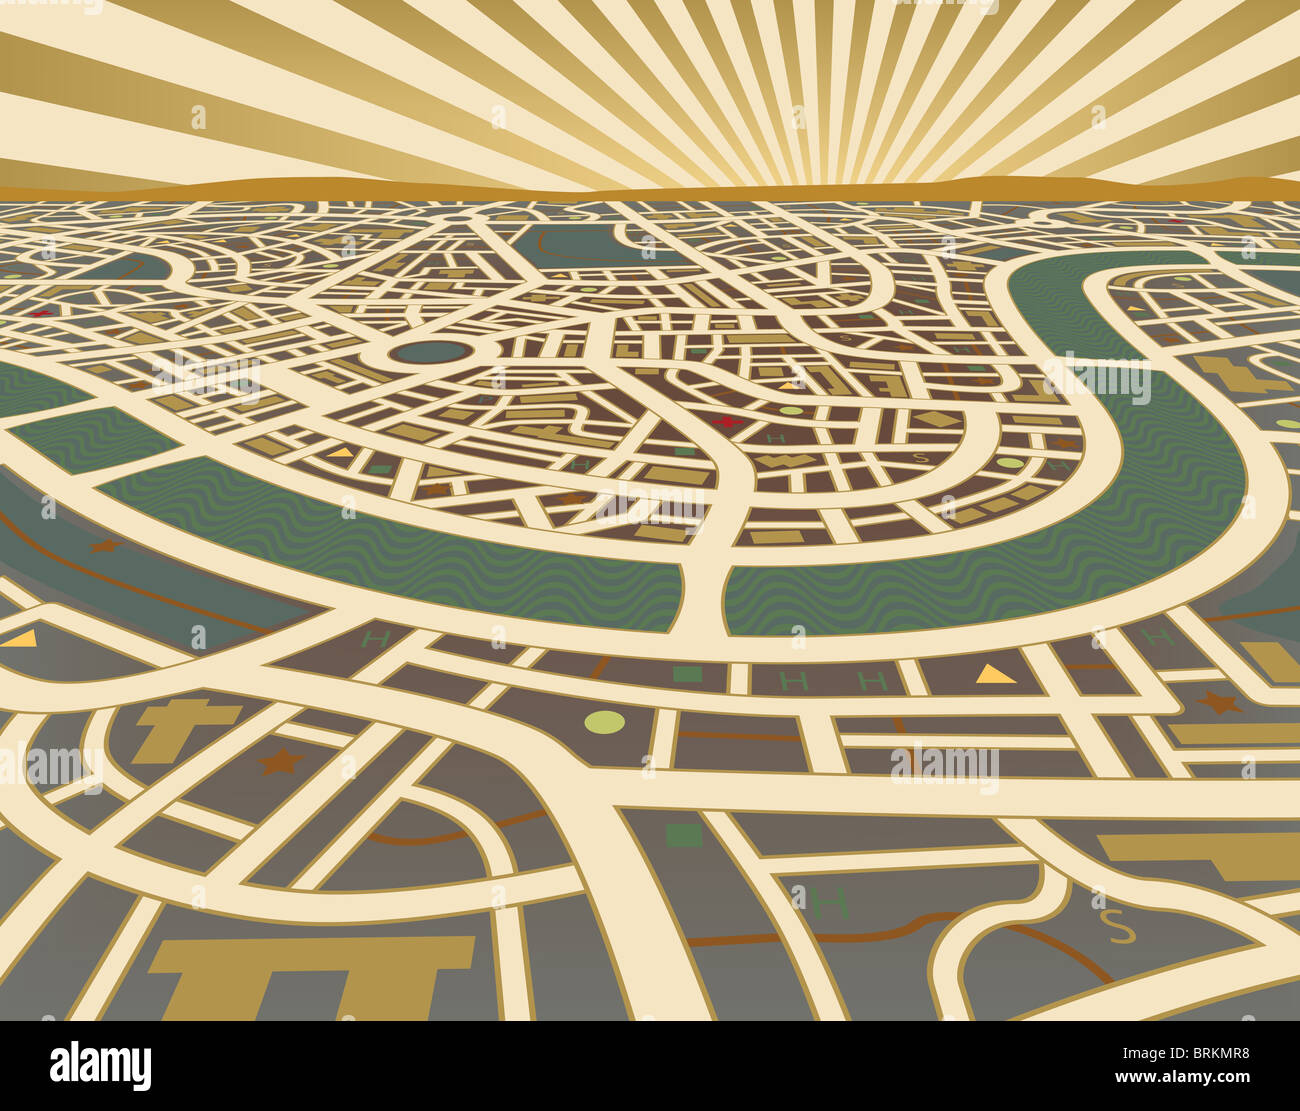 Illustration of a street map landscape with no names Stock Photo